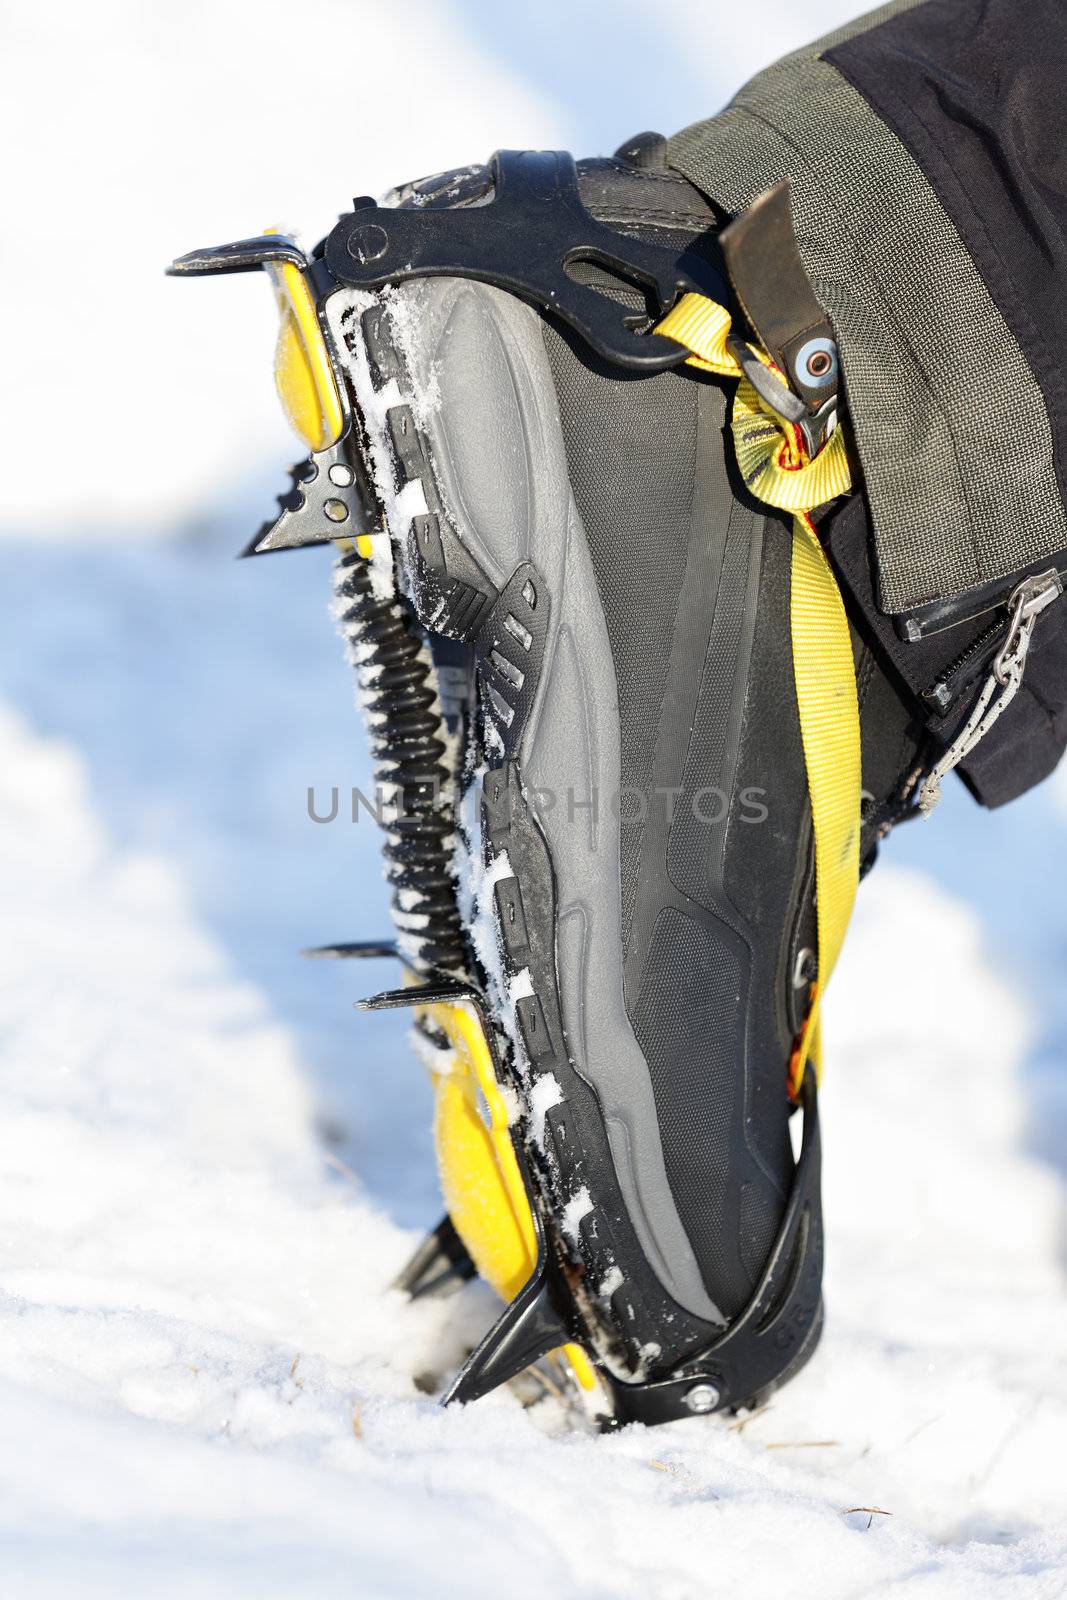 Crampons closeup. Crampon on winter boot for climbing, glacier walking or hiking and trekking on ice and hard snow.